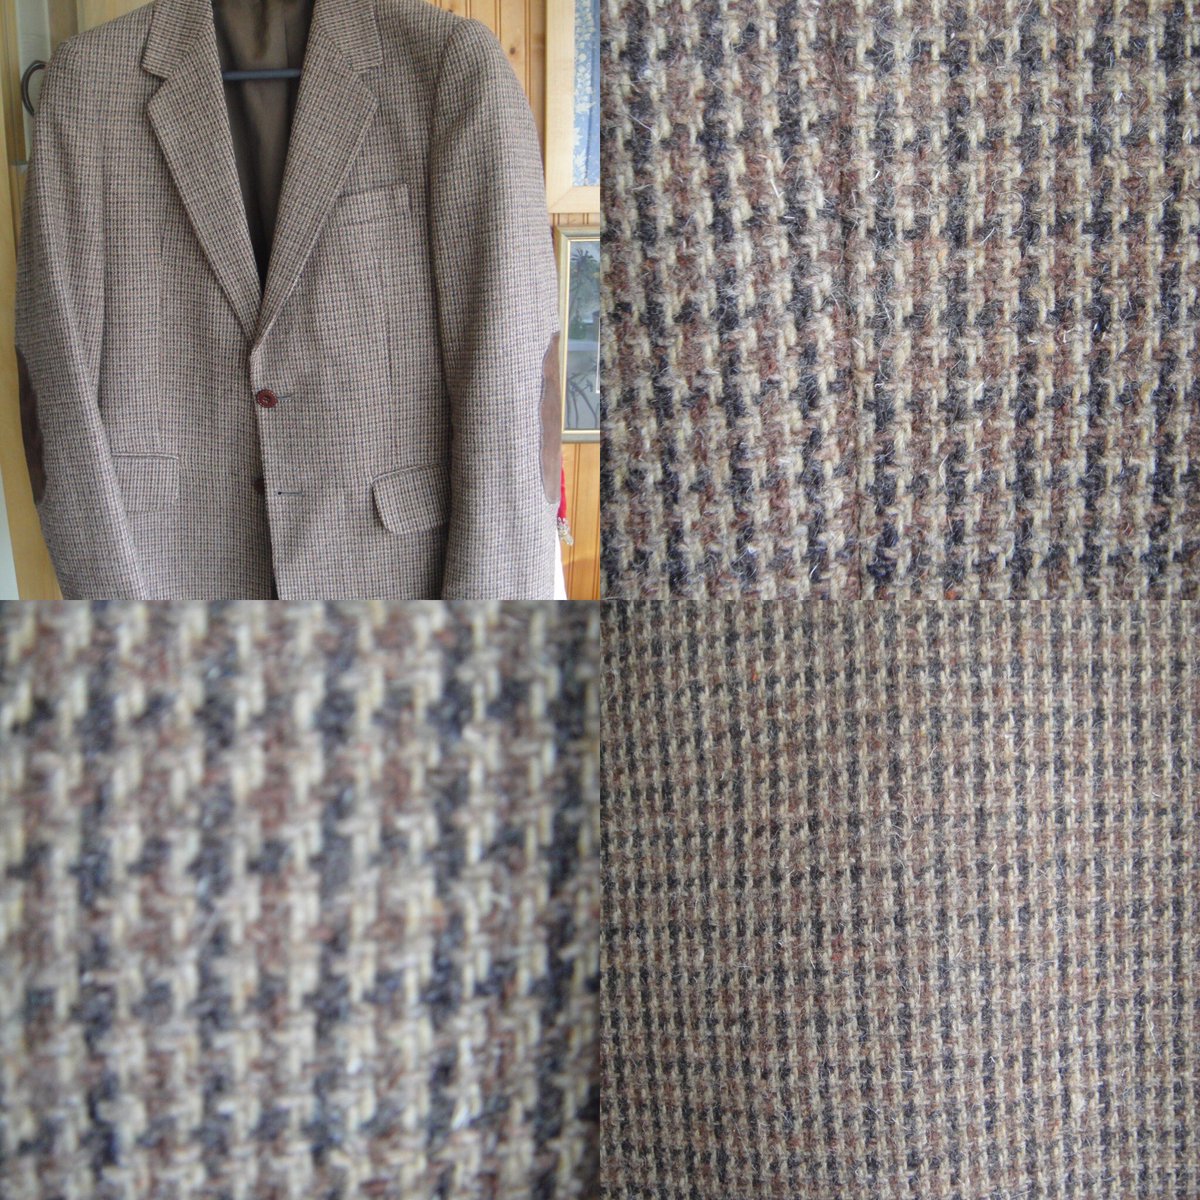 The search for Matts first costume was complicated. We searched lots of looks, I would say around 600 photos were taken and time was running out but each fitting got closer to the end result. Until Matt suggested Einstein as a reference and we found the vintage tweed jacket.